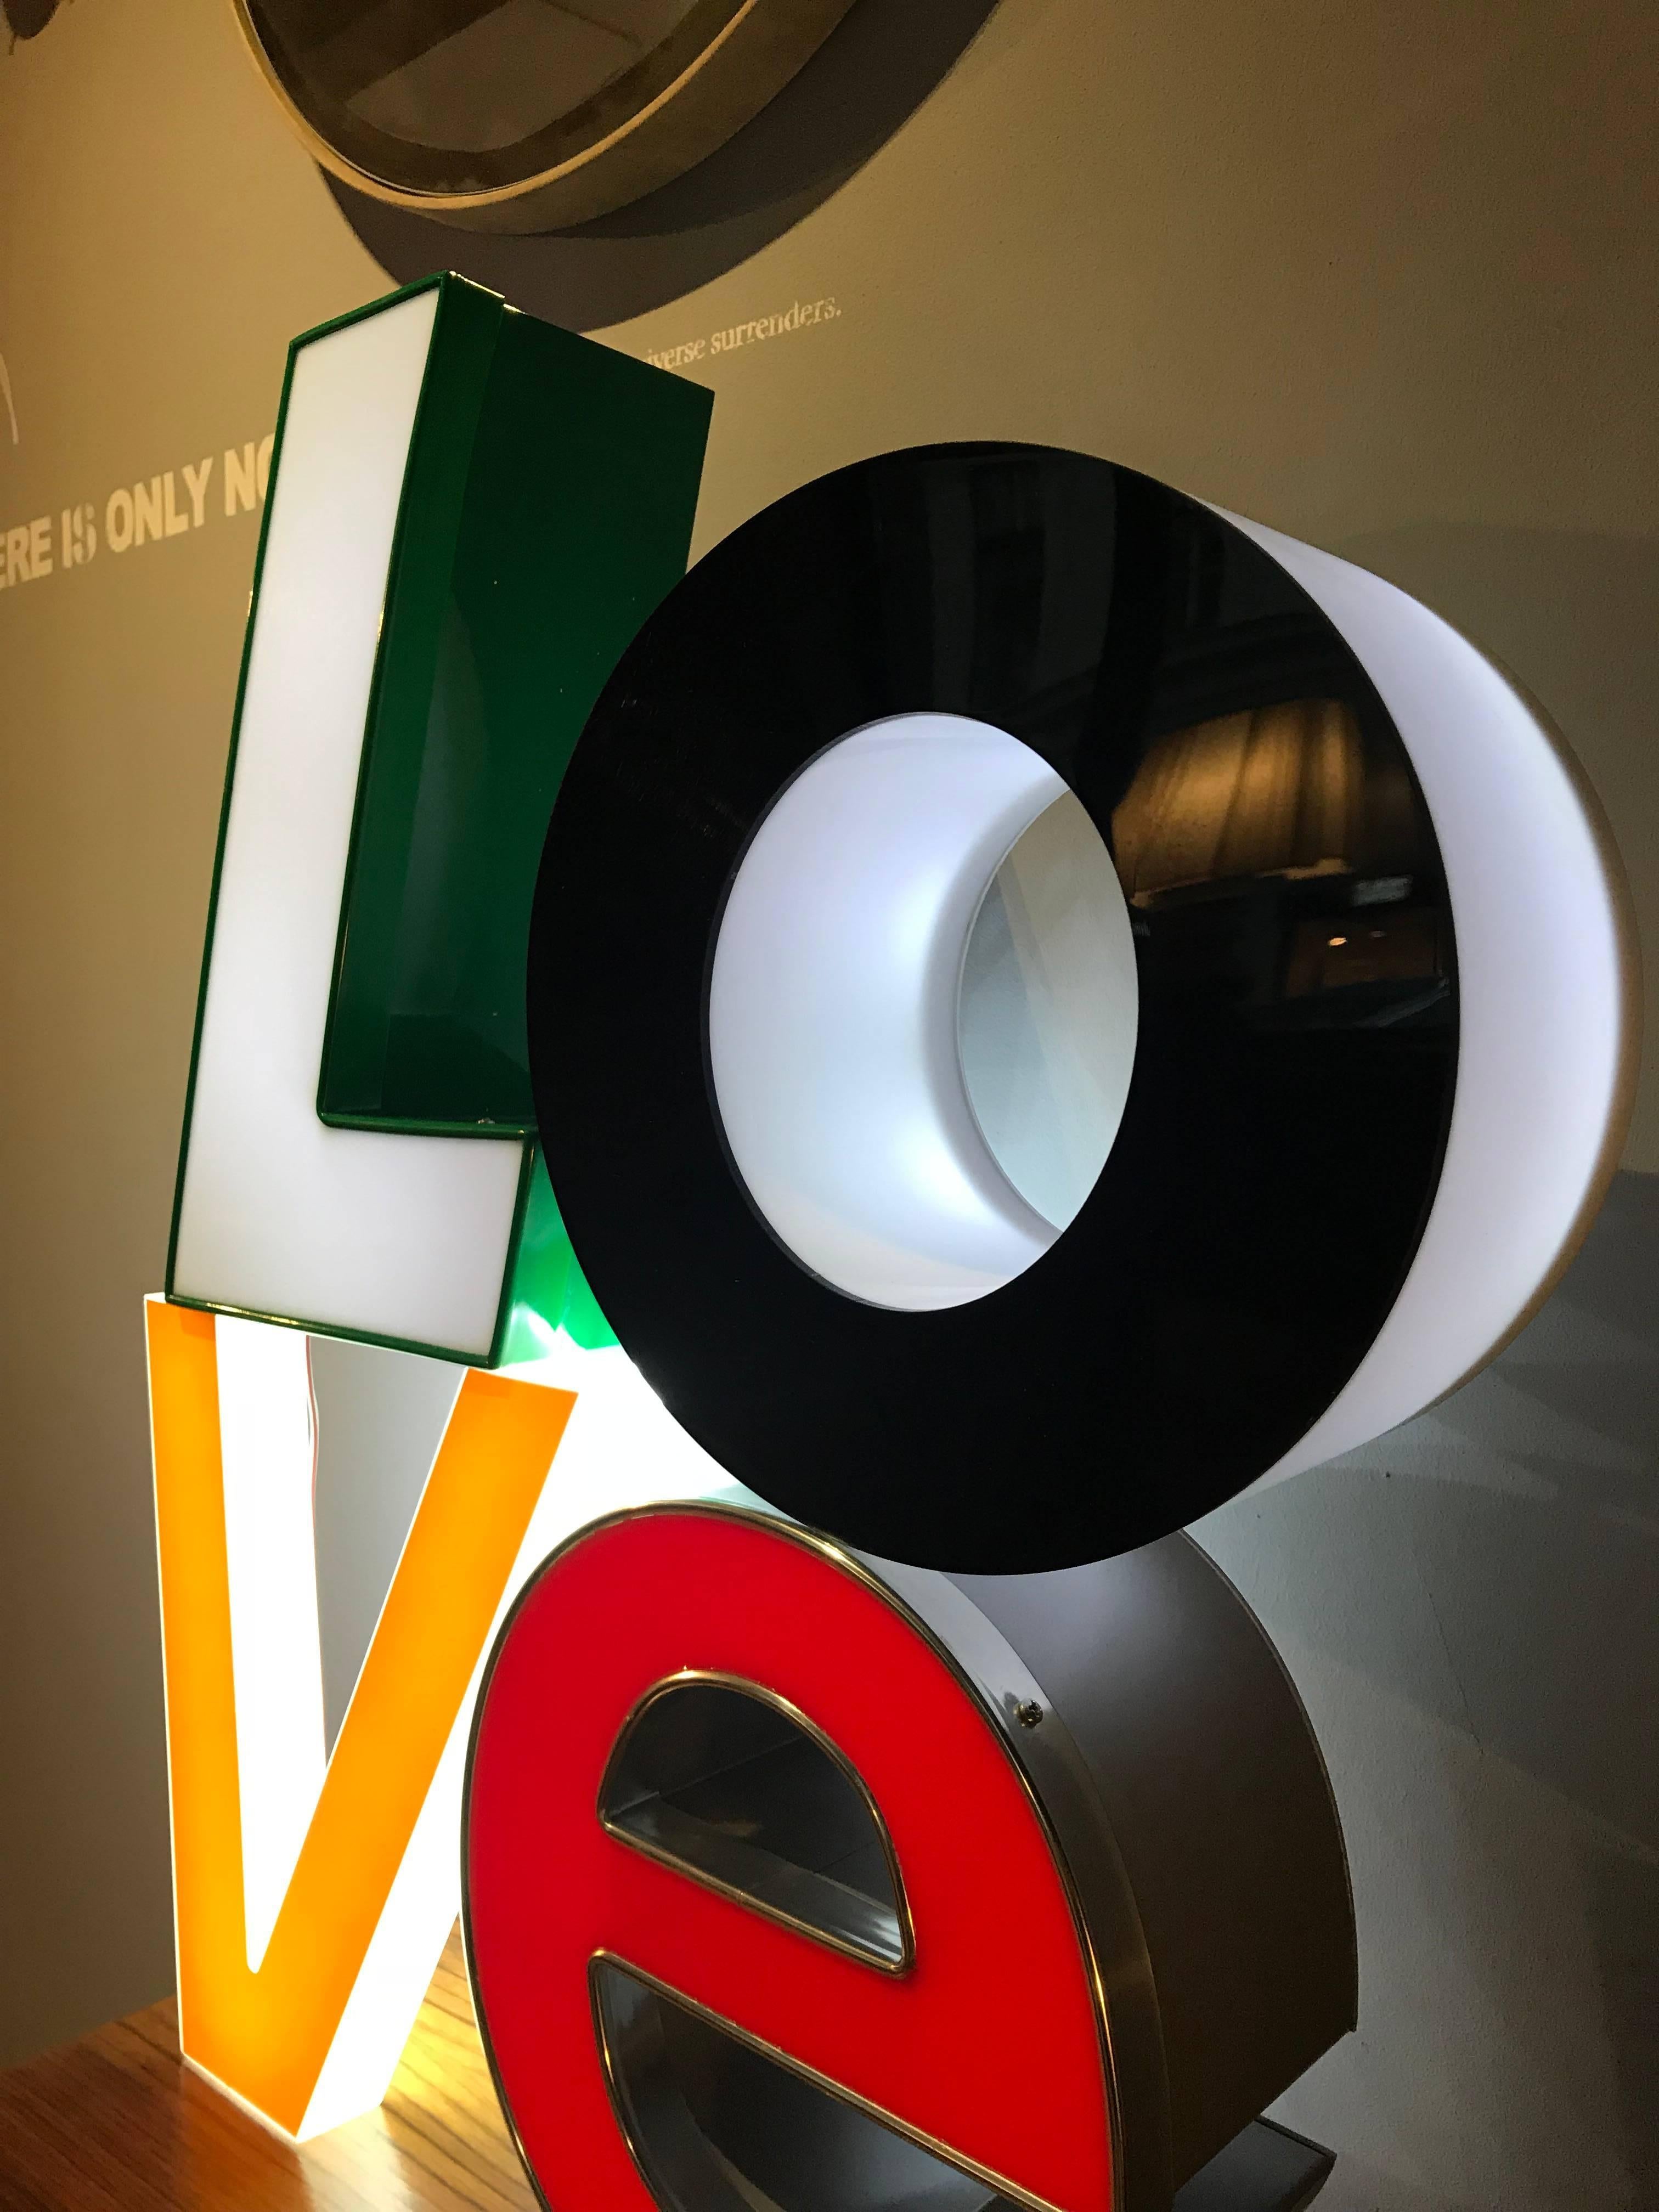 Metalwork 3D LOVE Lighting Sign in Style of Robert Indiana, Arty Letter Sculpture